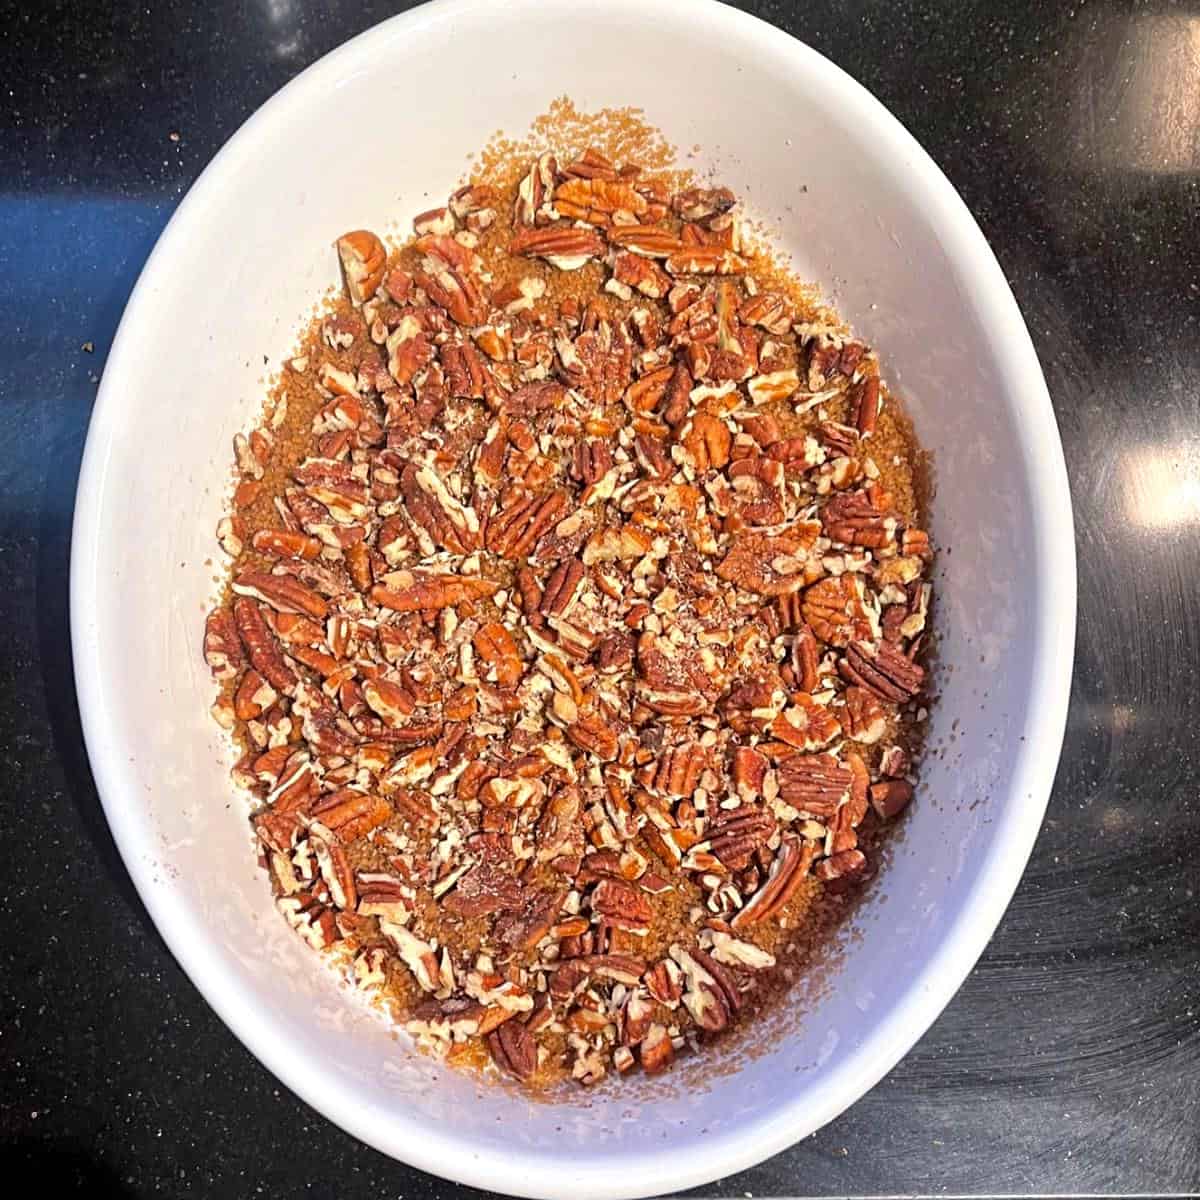 Sugar and pecans in oval baking dish.